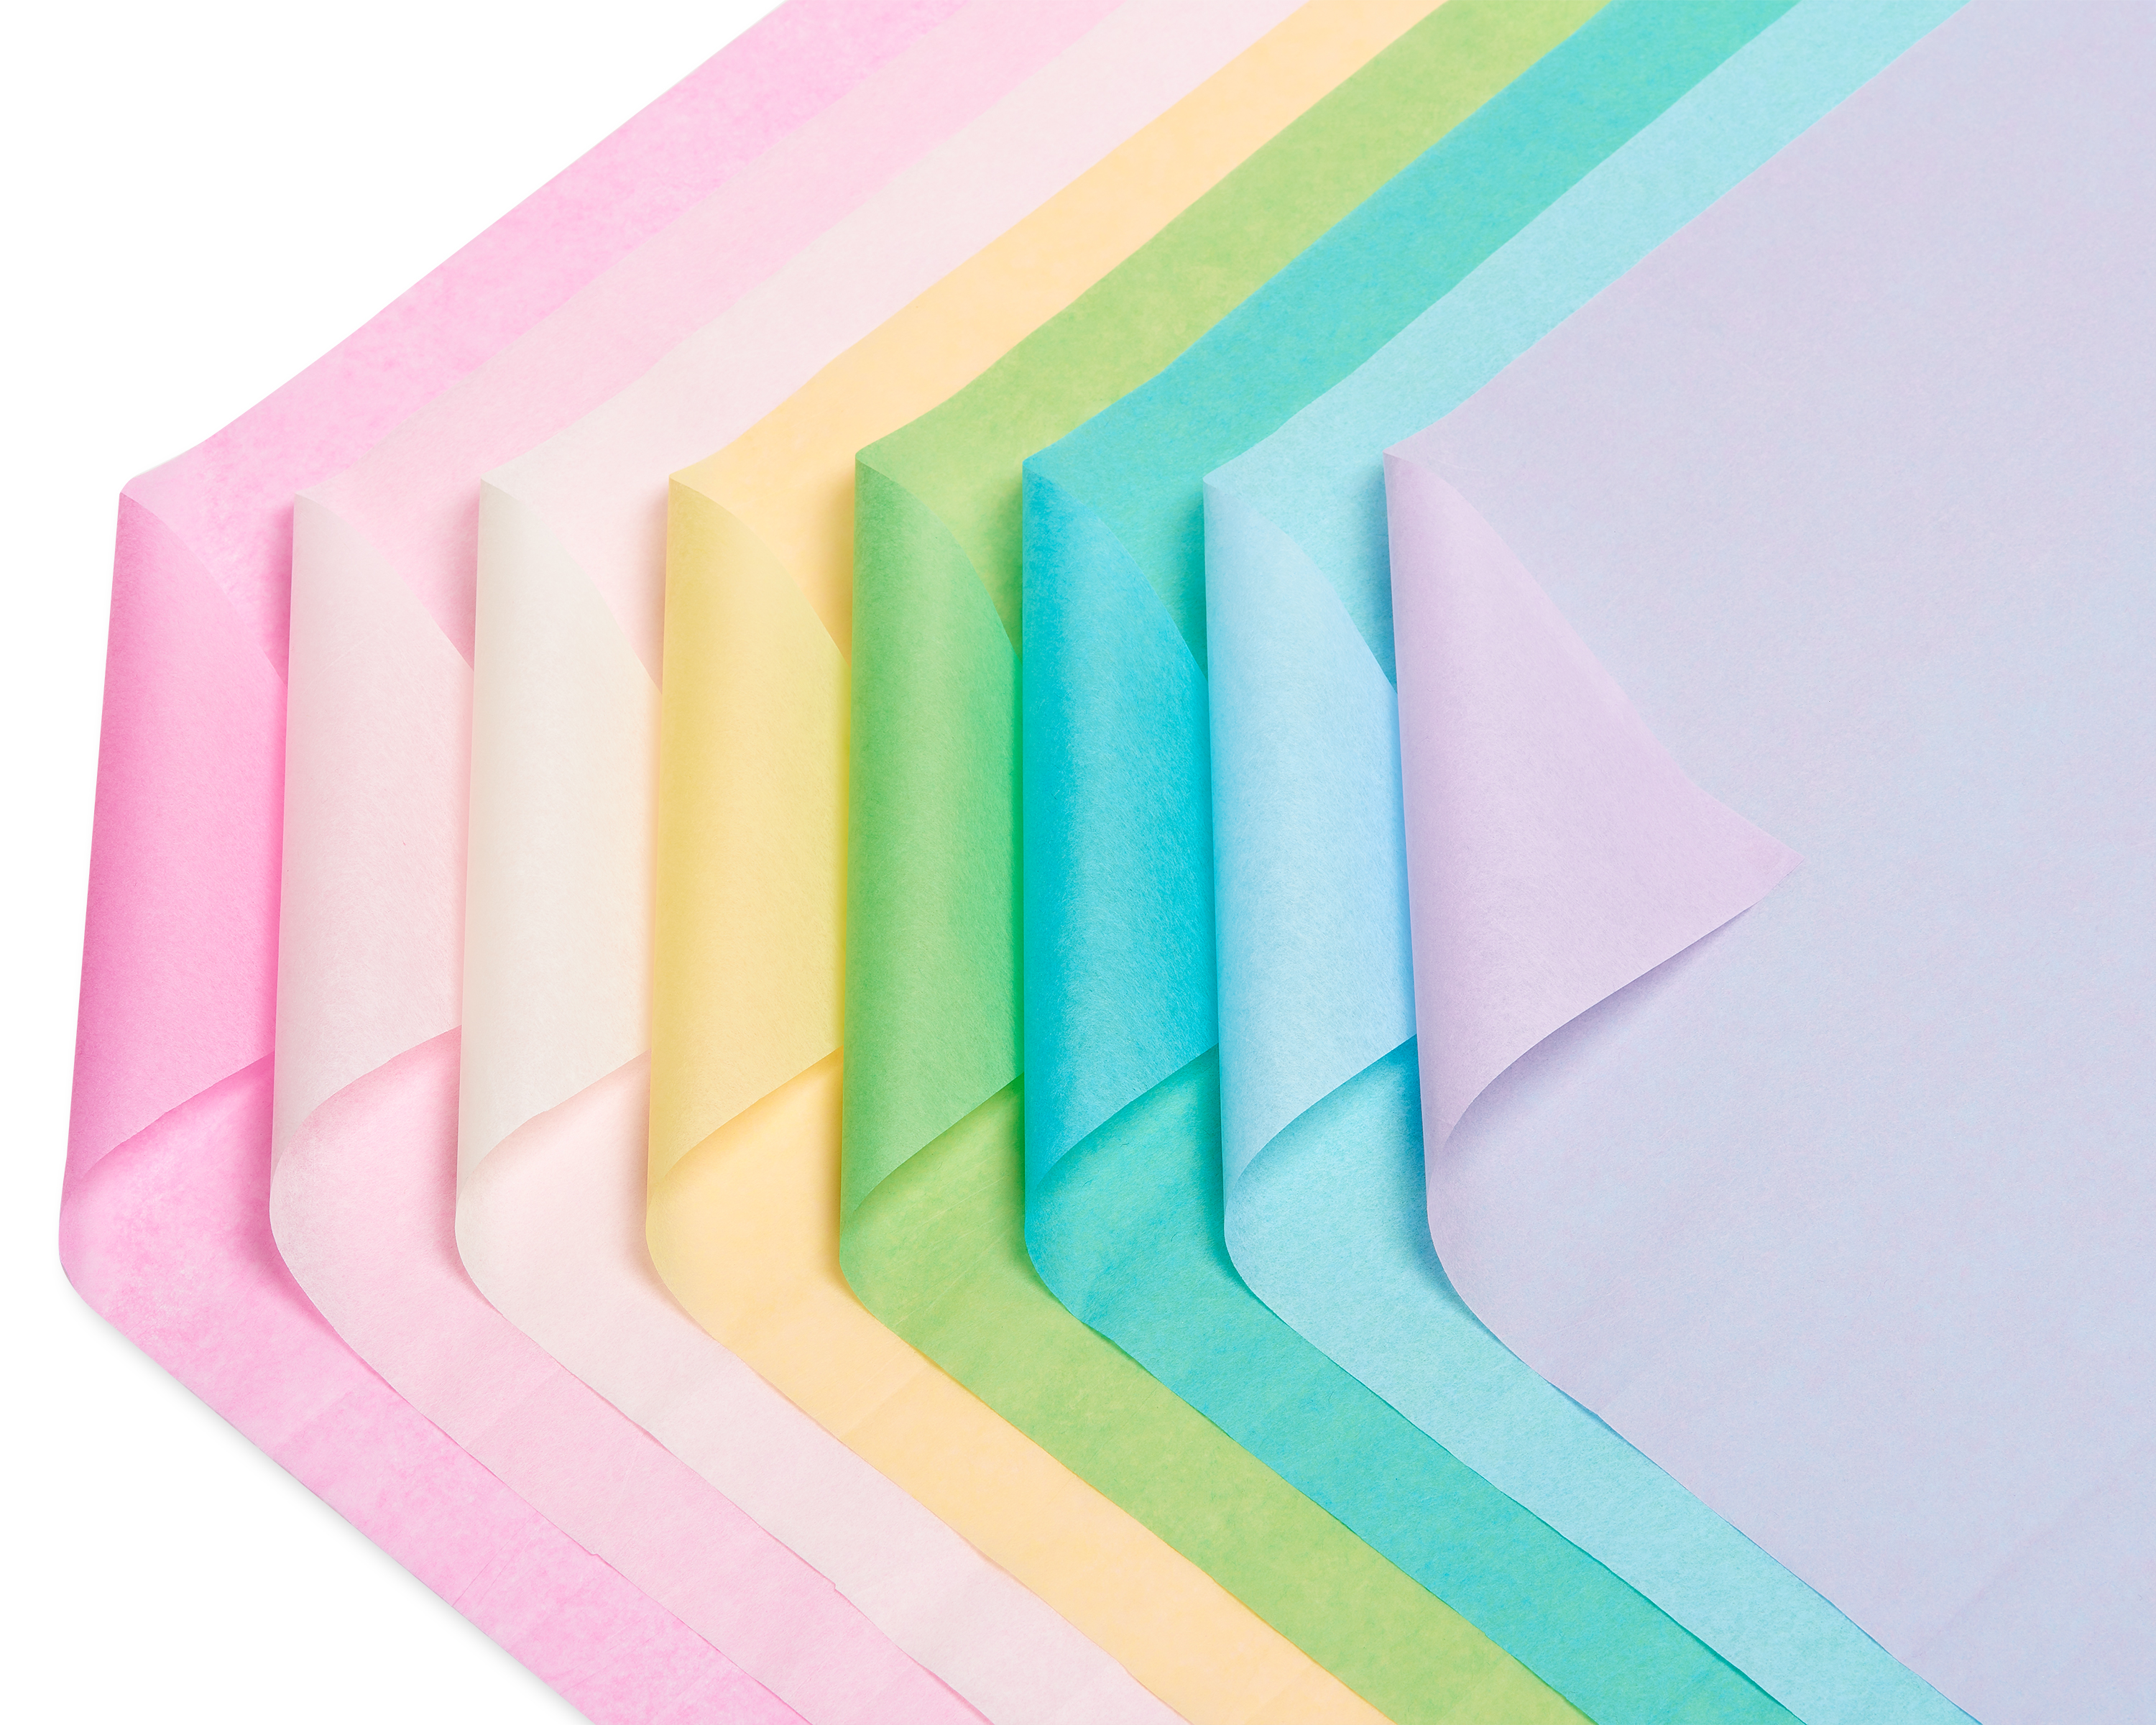 American Greetings Pastel Tissue Paper (40-Sheets) 